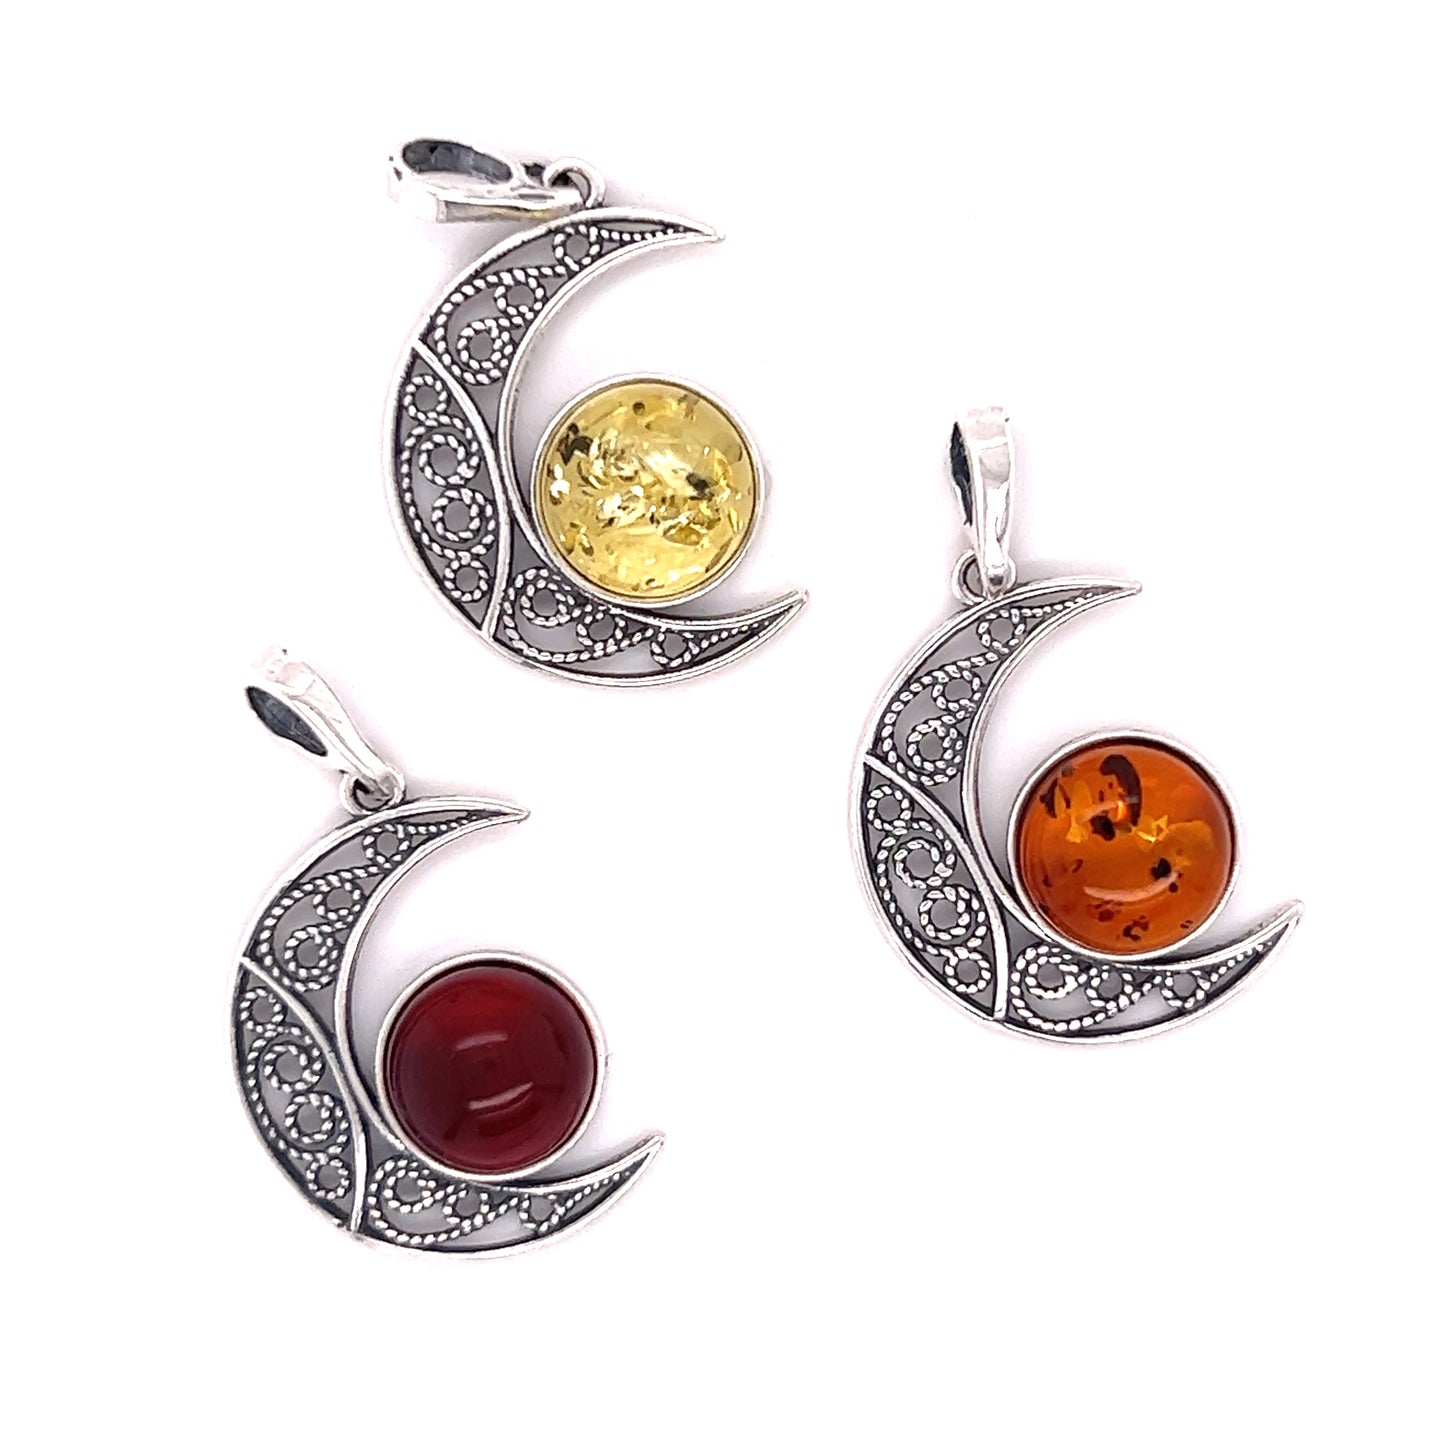 Three Super Silver Baltic Amber Moon Pendants with moonstone accents in .925 Sterling Silver.